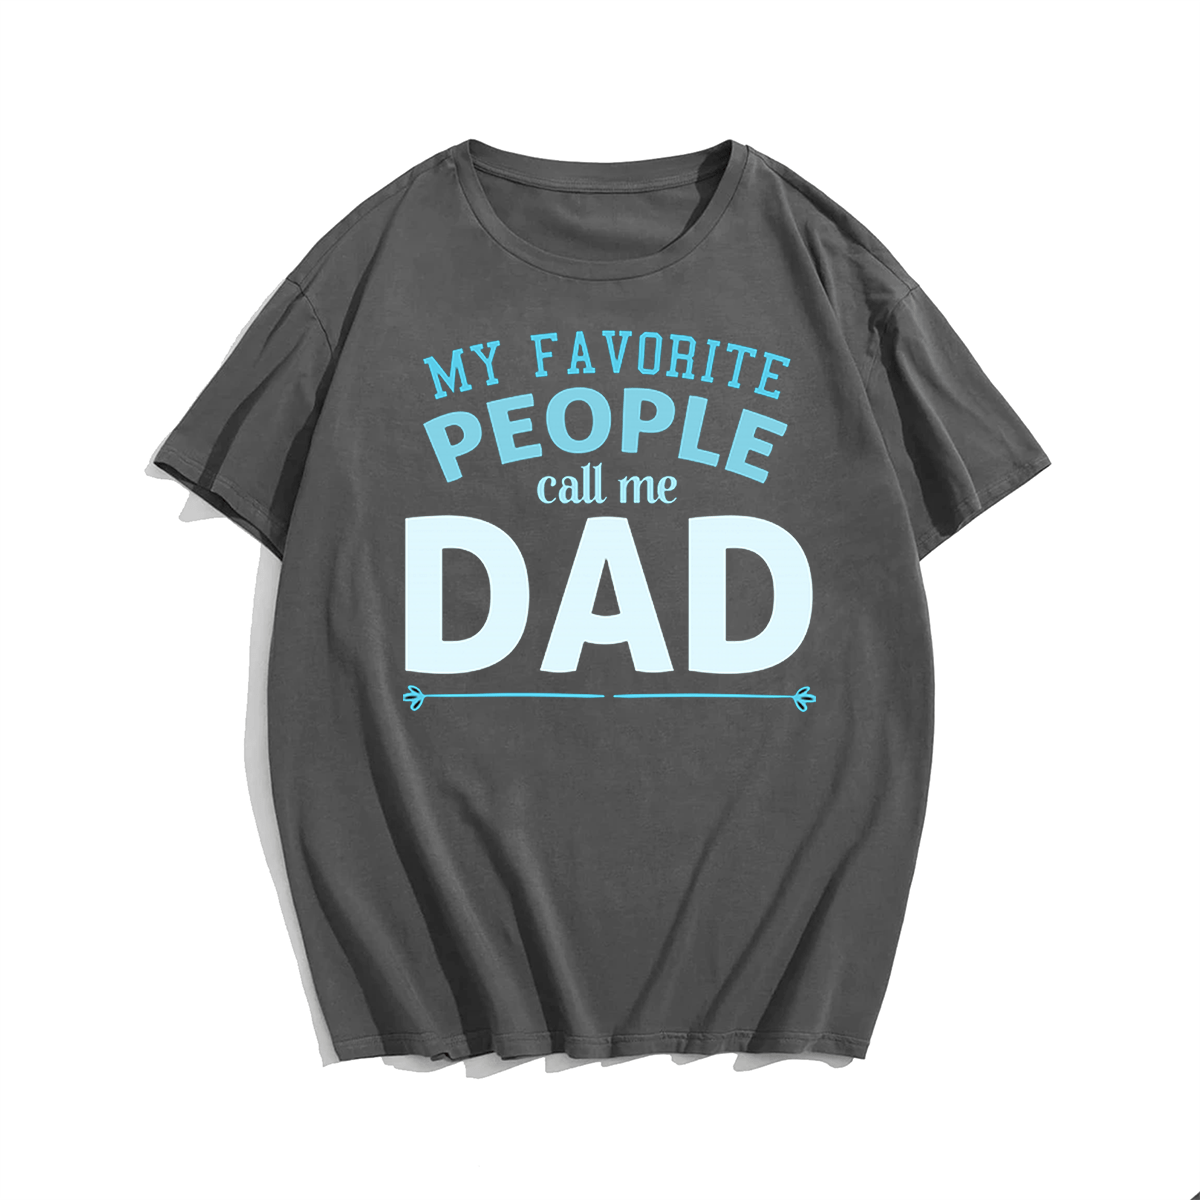 My Favorite People Call Me Dad T-shirt for Men, Oversize Plus Size Big & Tall Man Clothing